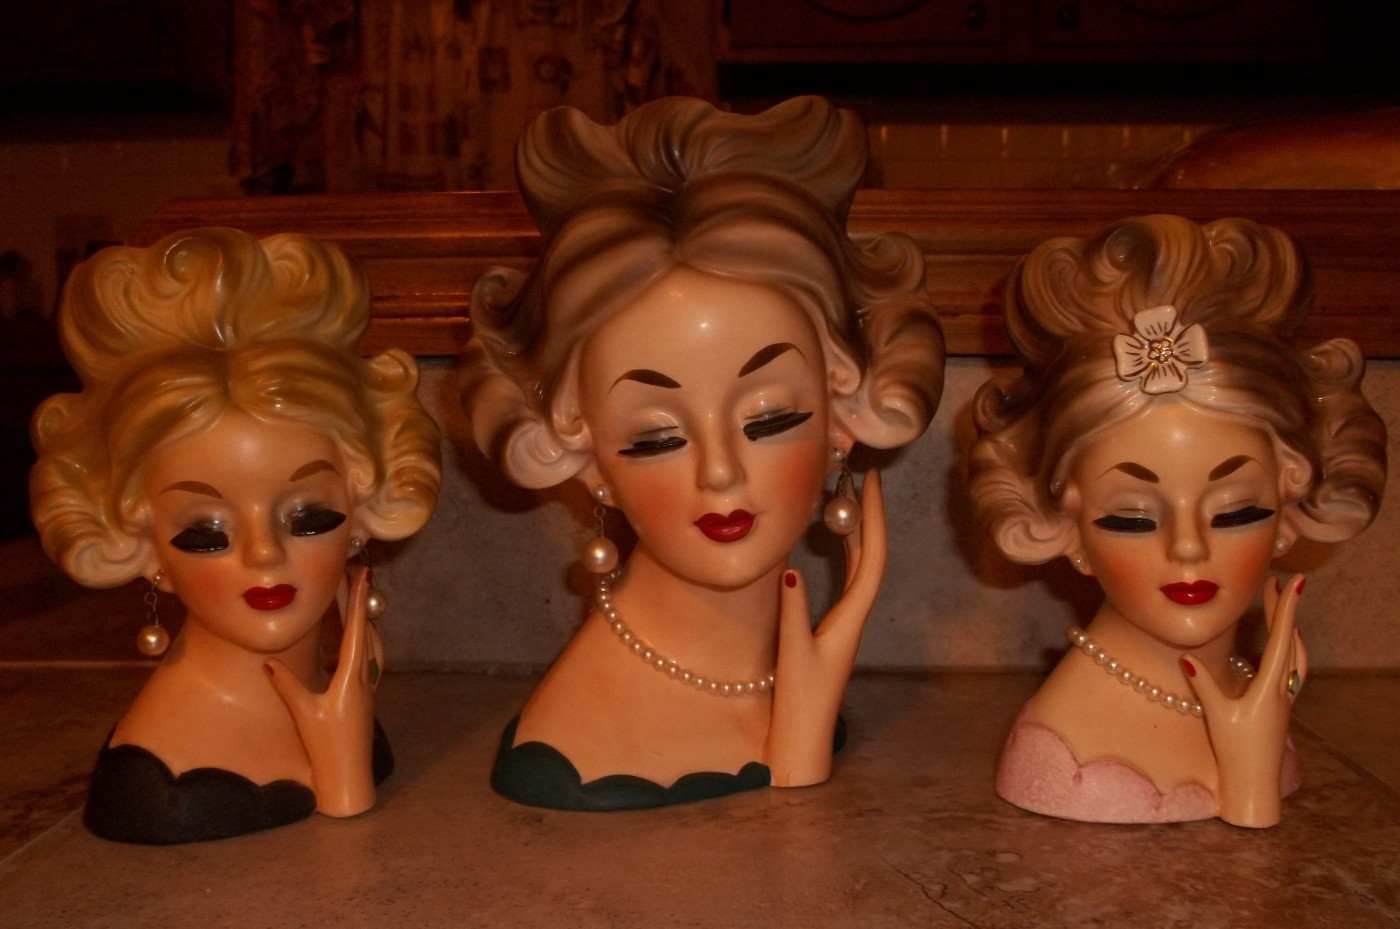 Vintage Lady Head Vases for Sale Of Lovely Ladies Vintage Head Vases I Antique Online within I Purchased A 300 Collection A Little while Back and Ive Been Busy Selling Most Of them Here are A Few that Ive Kept